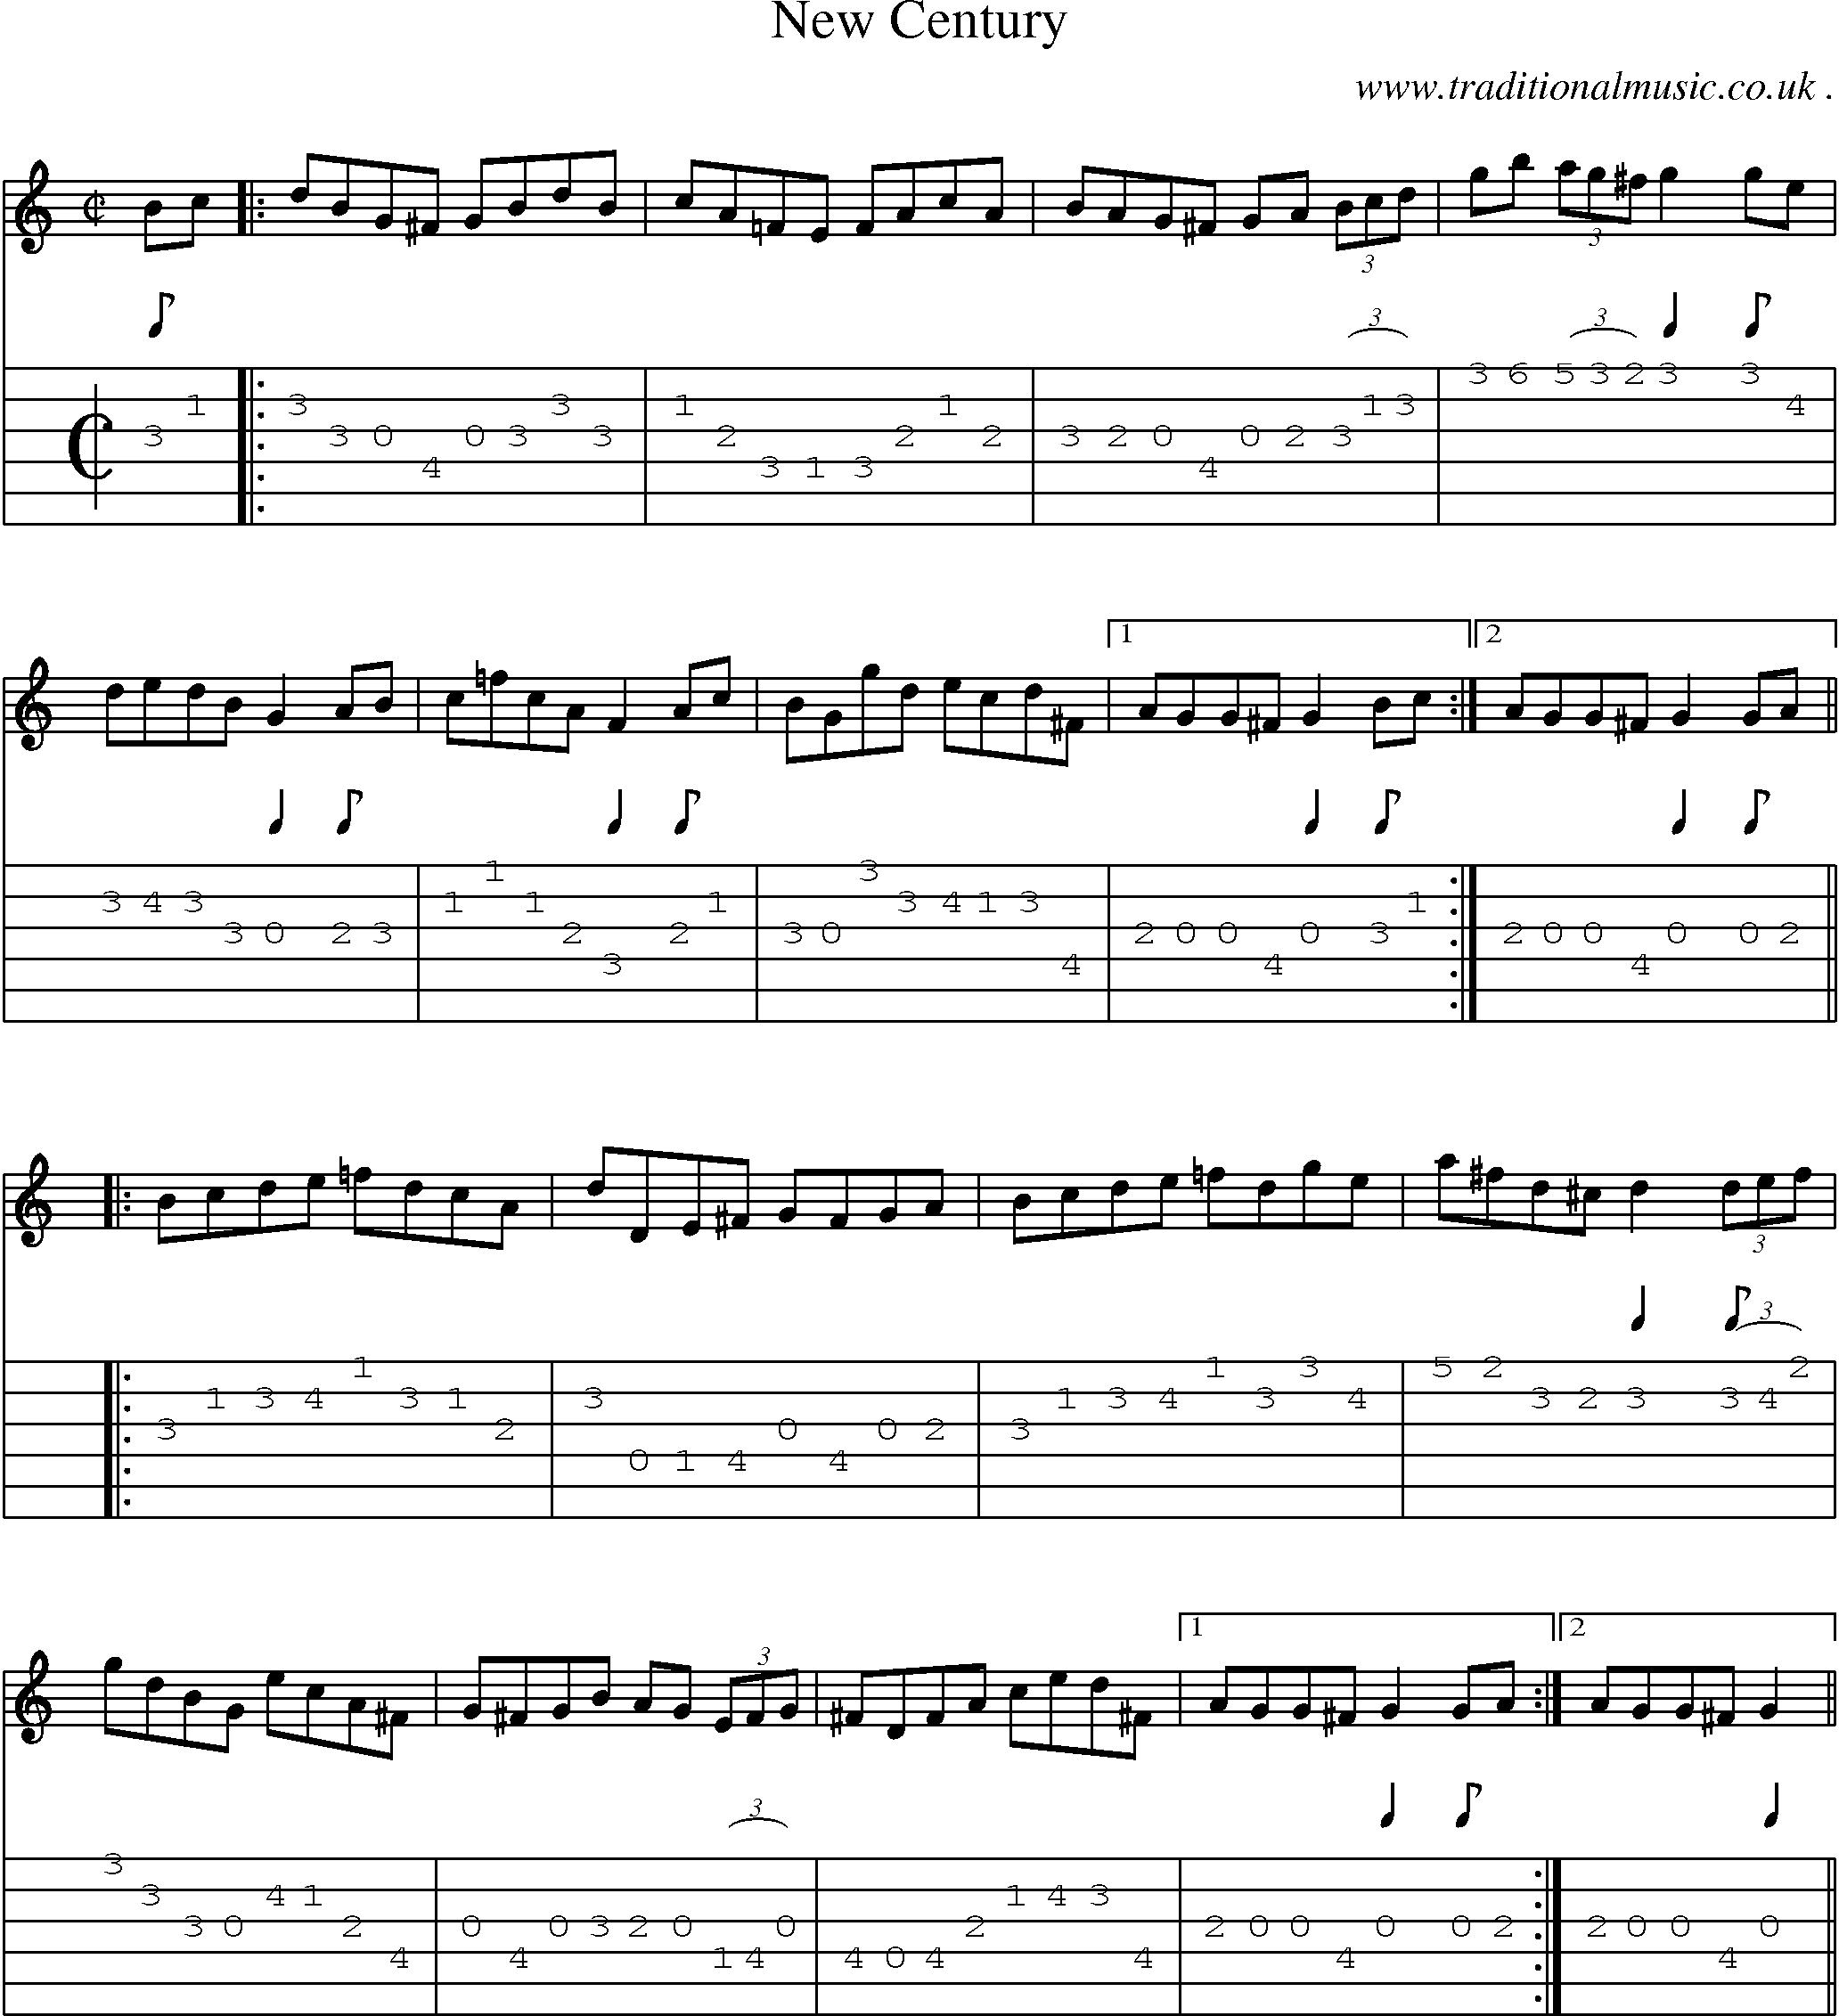 Sheet-Music and Guitar Tabs for New Century